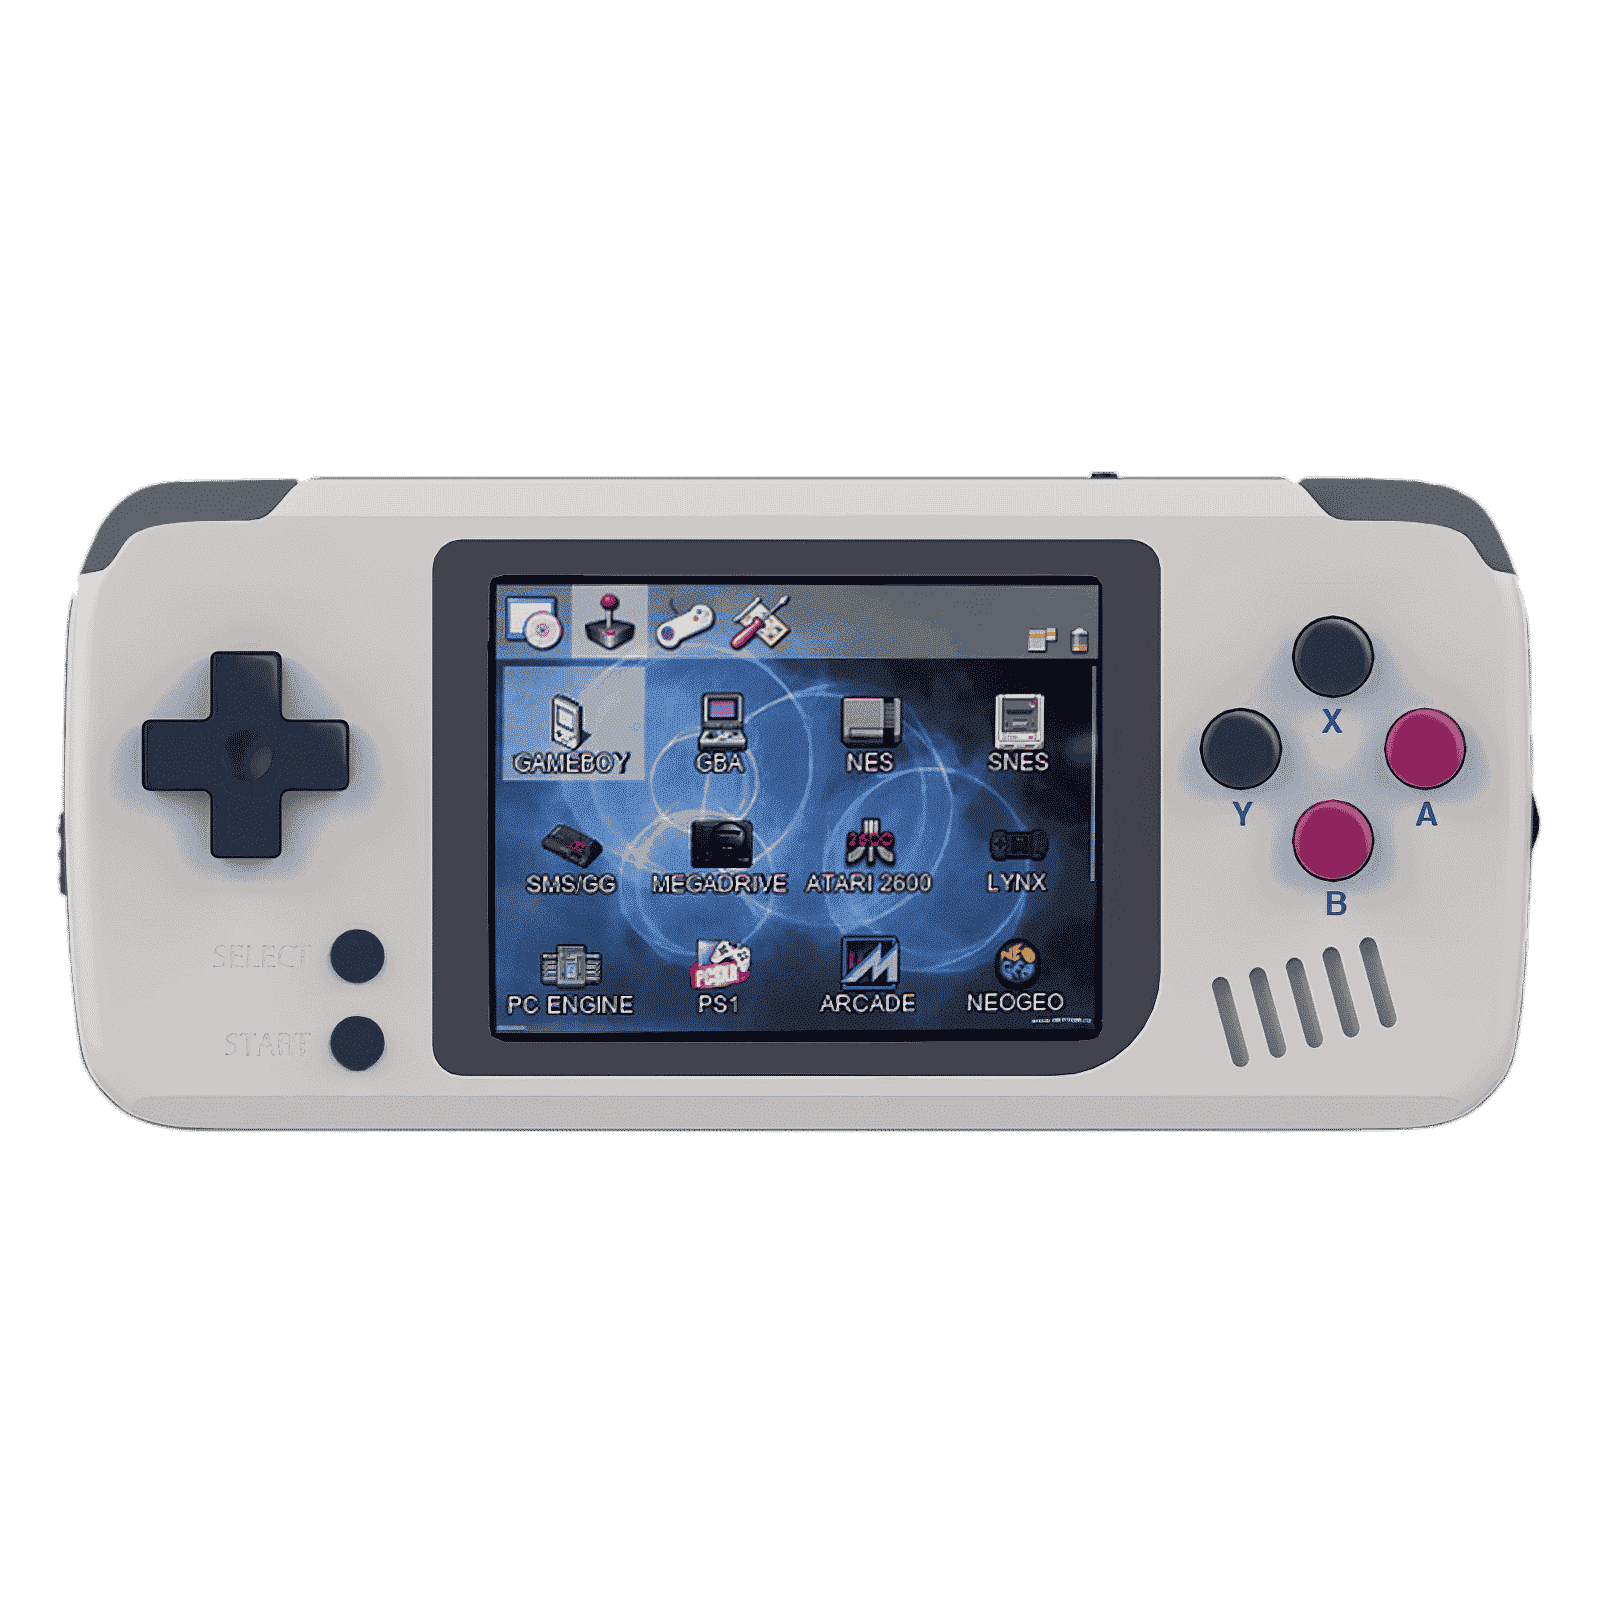 BITTBOY Pocket GO - Retro Gaming Portable Handheld Console - Front View